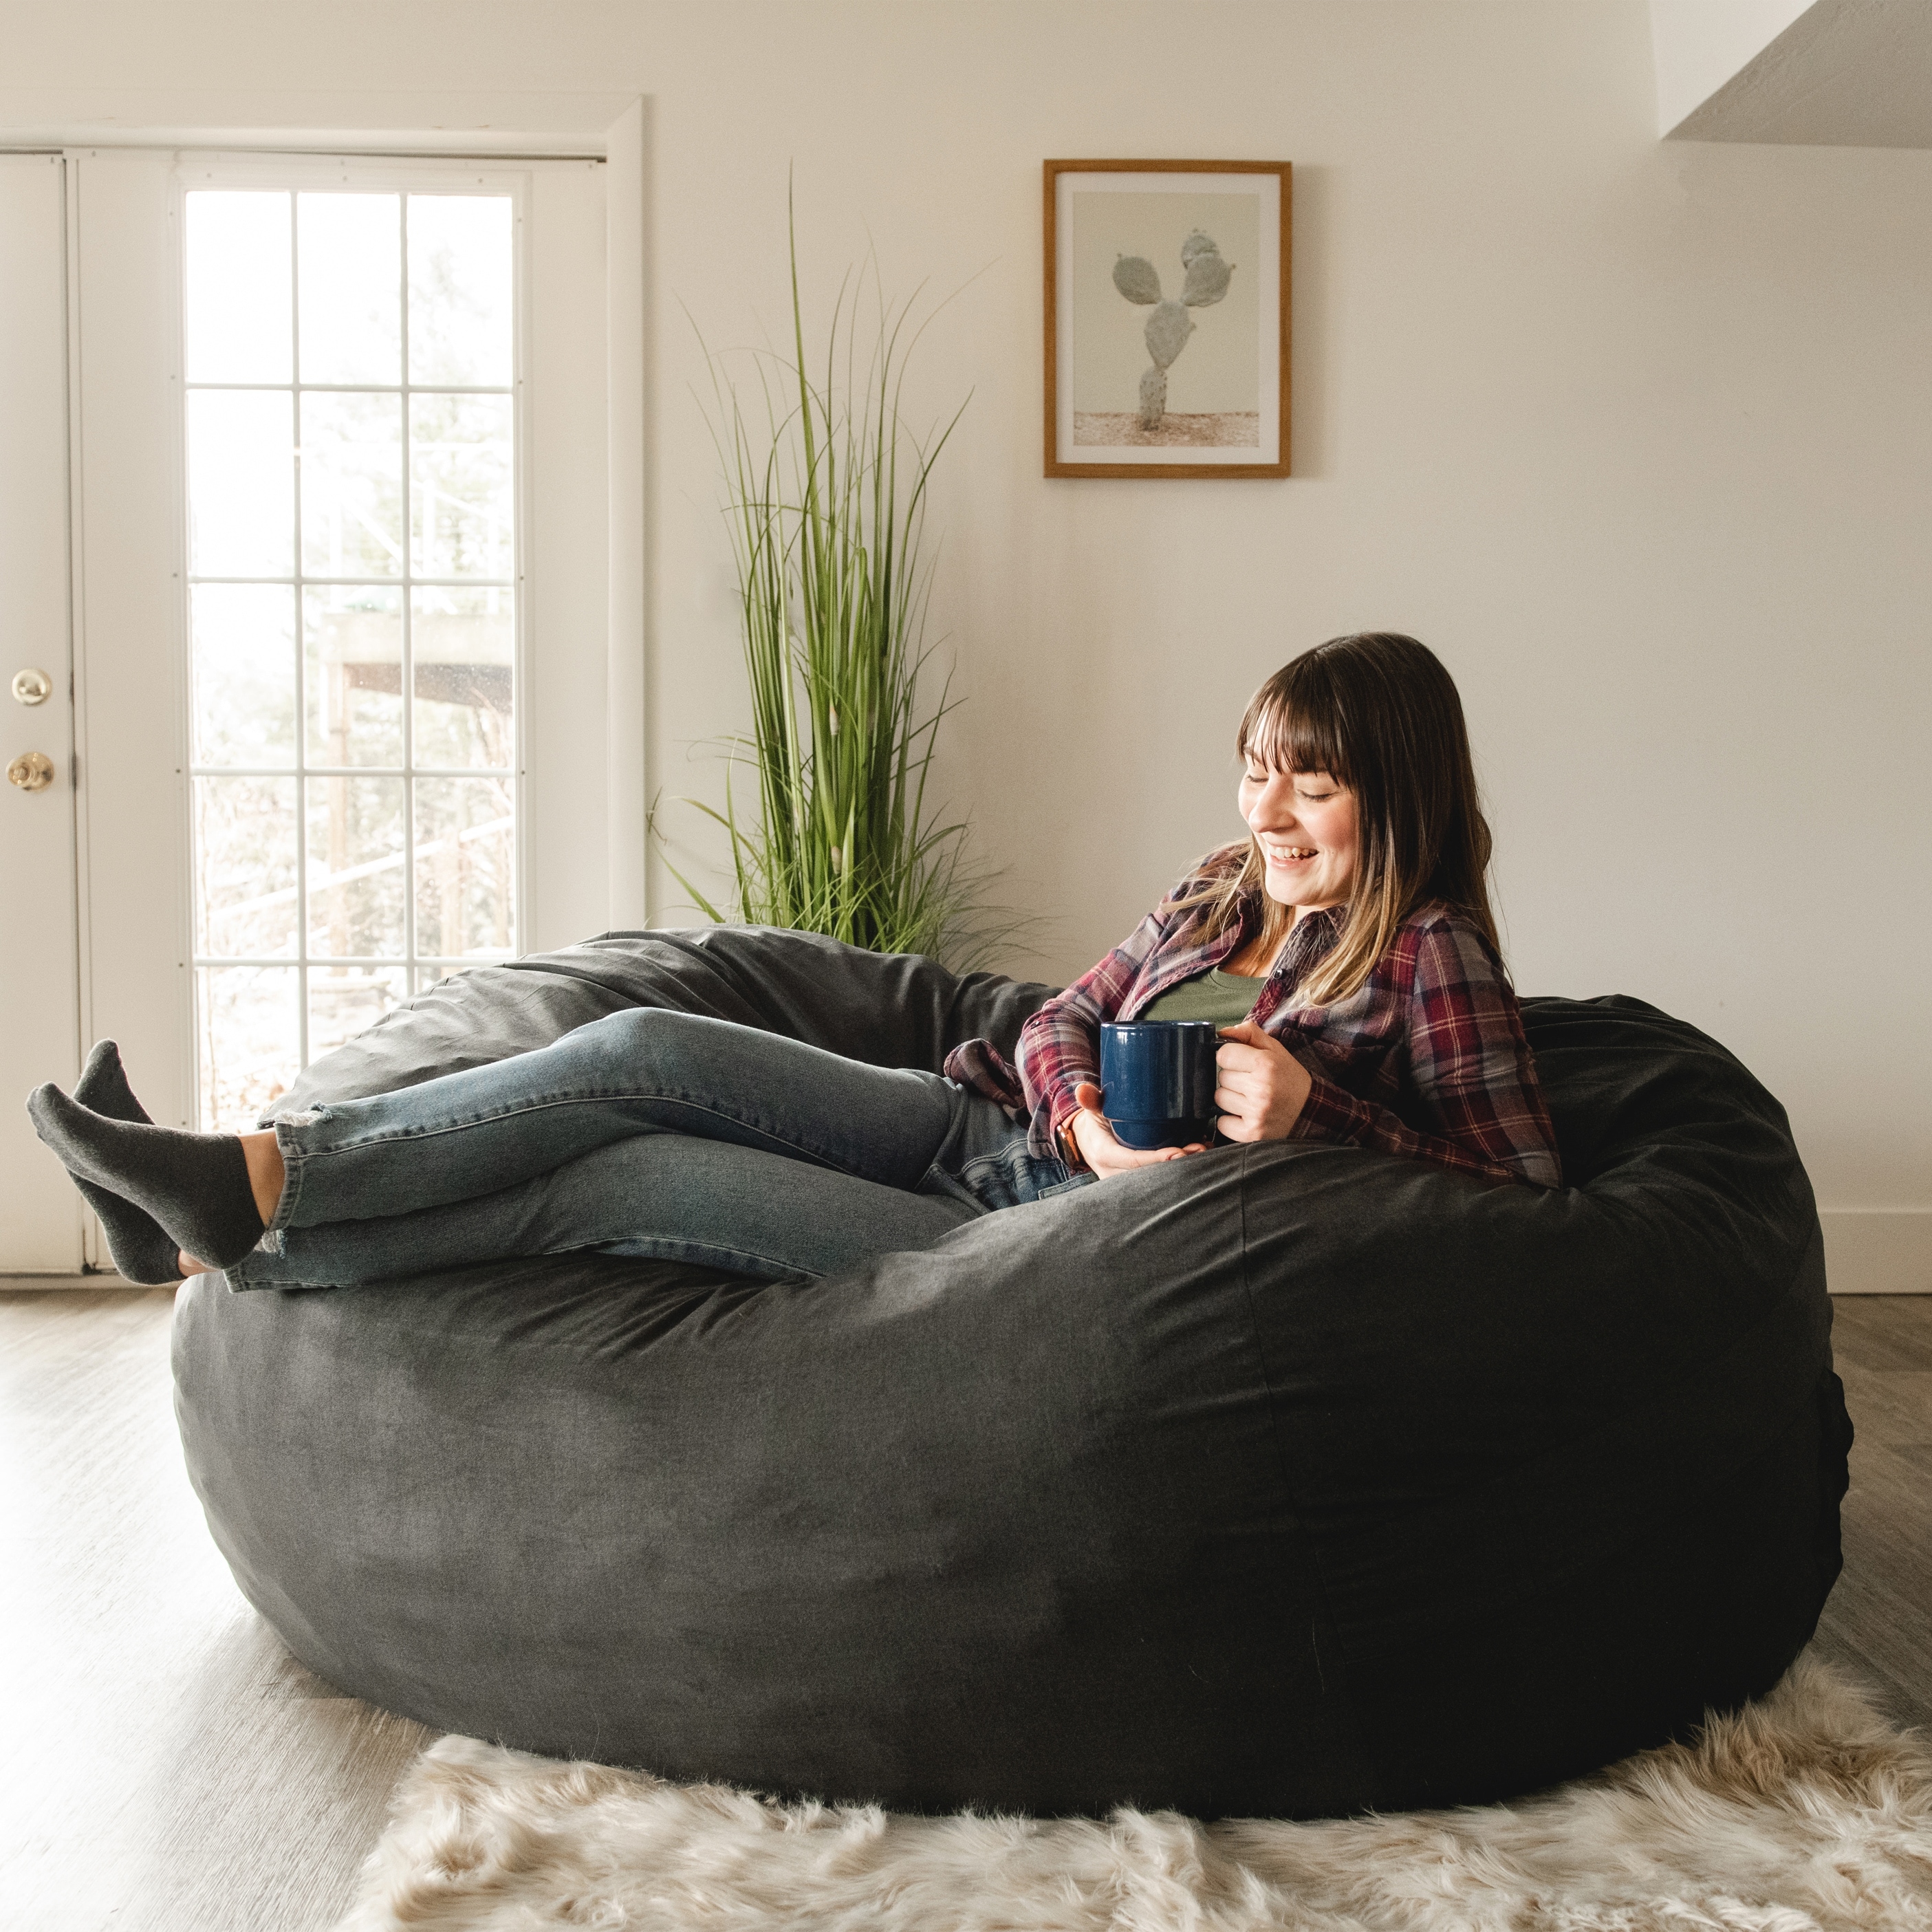 https://ak1.ostkcdn.com/images/products/is/images/direct/4844206eea4fa7f0409c0f953fa4a880f706754f/Big-Joe-XL-Fuf-Bean-Bag-Chair-%28Removable-Cover%29.jpg